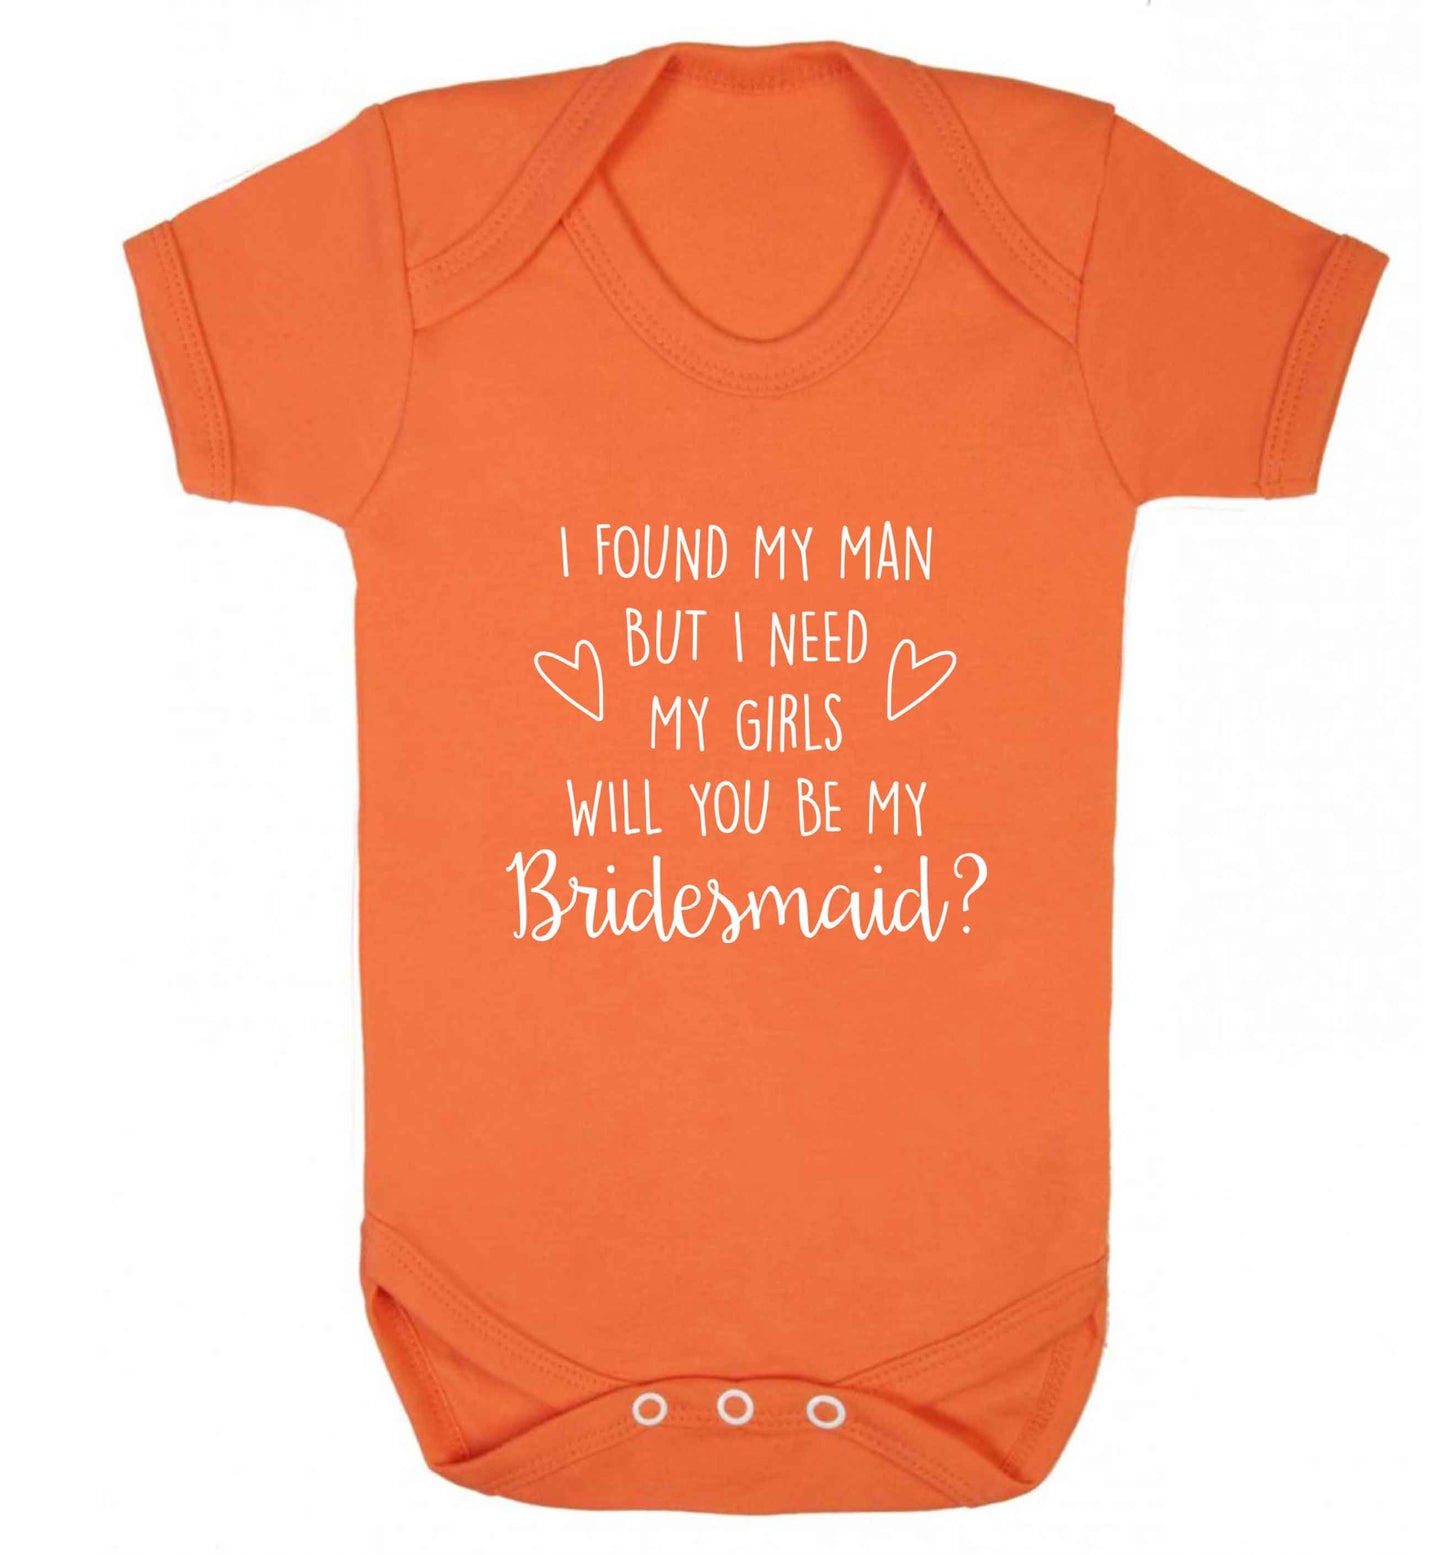 I found my man but I need my girls will you be my bridesmaid? baby vest orange 18-24 months